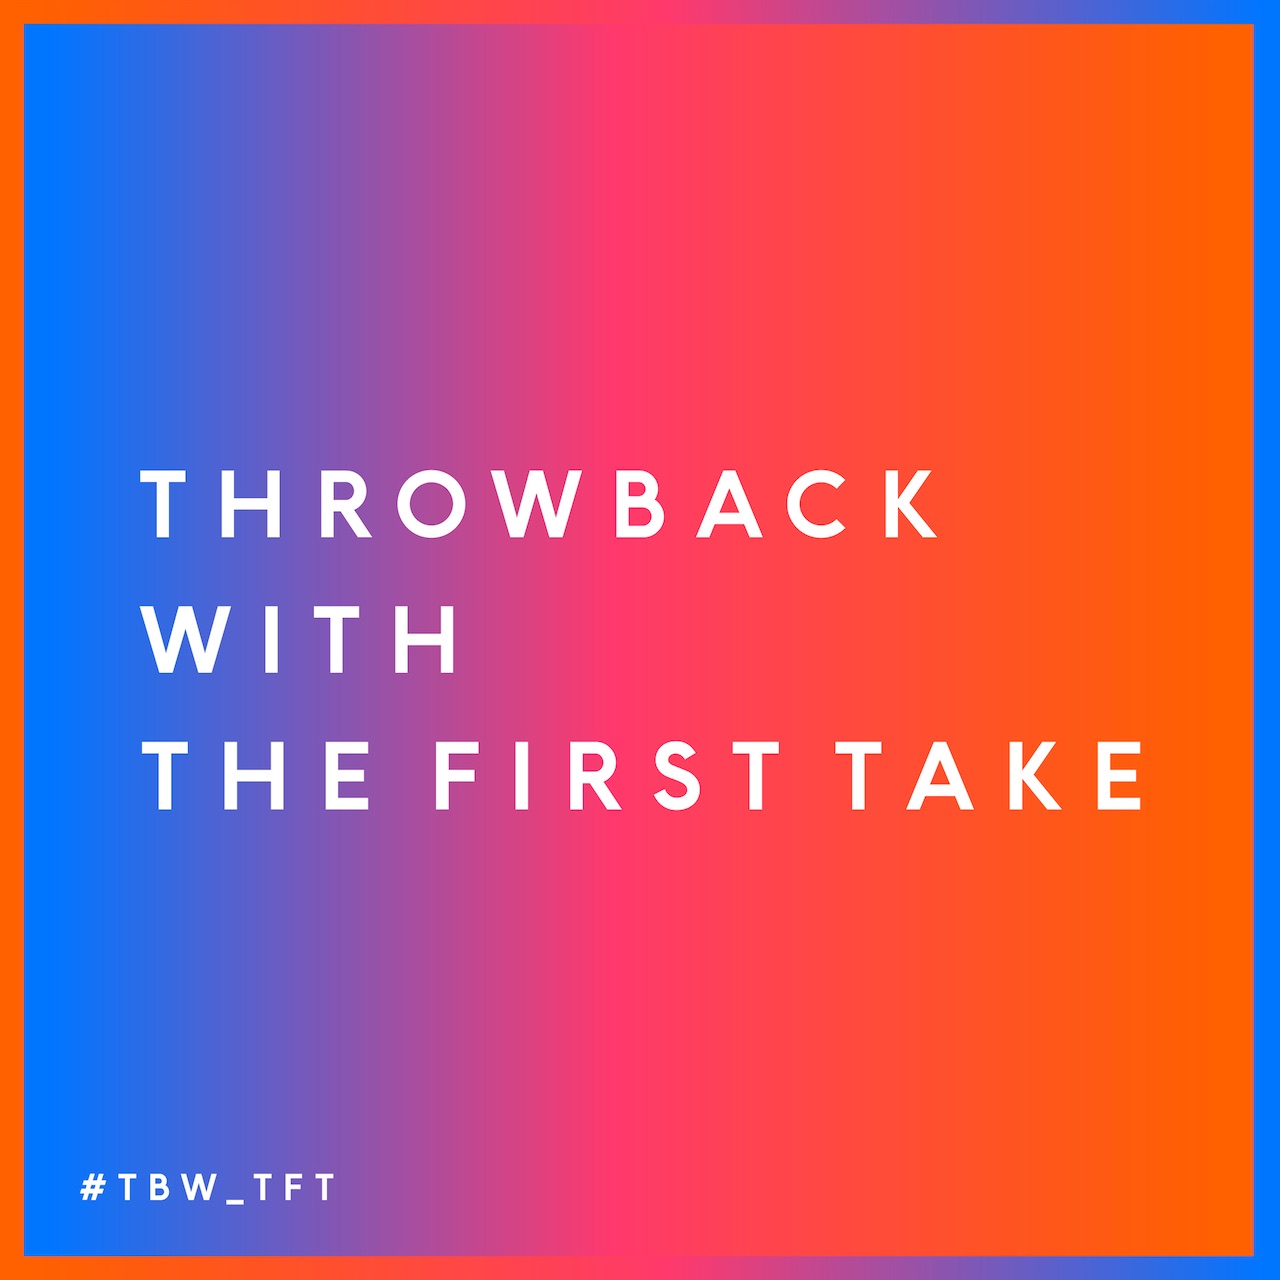 「THE FIRST TAKE」4周年特別企画「THROWBACK with THE FIRST TAKE」を4日連続プレミア公開！